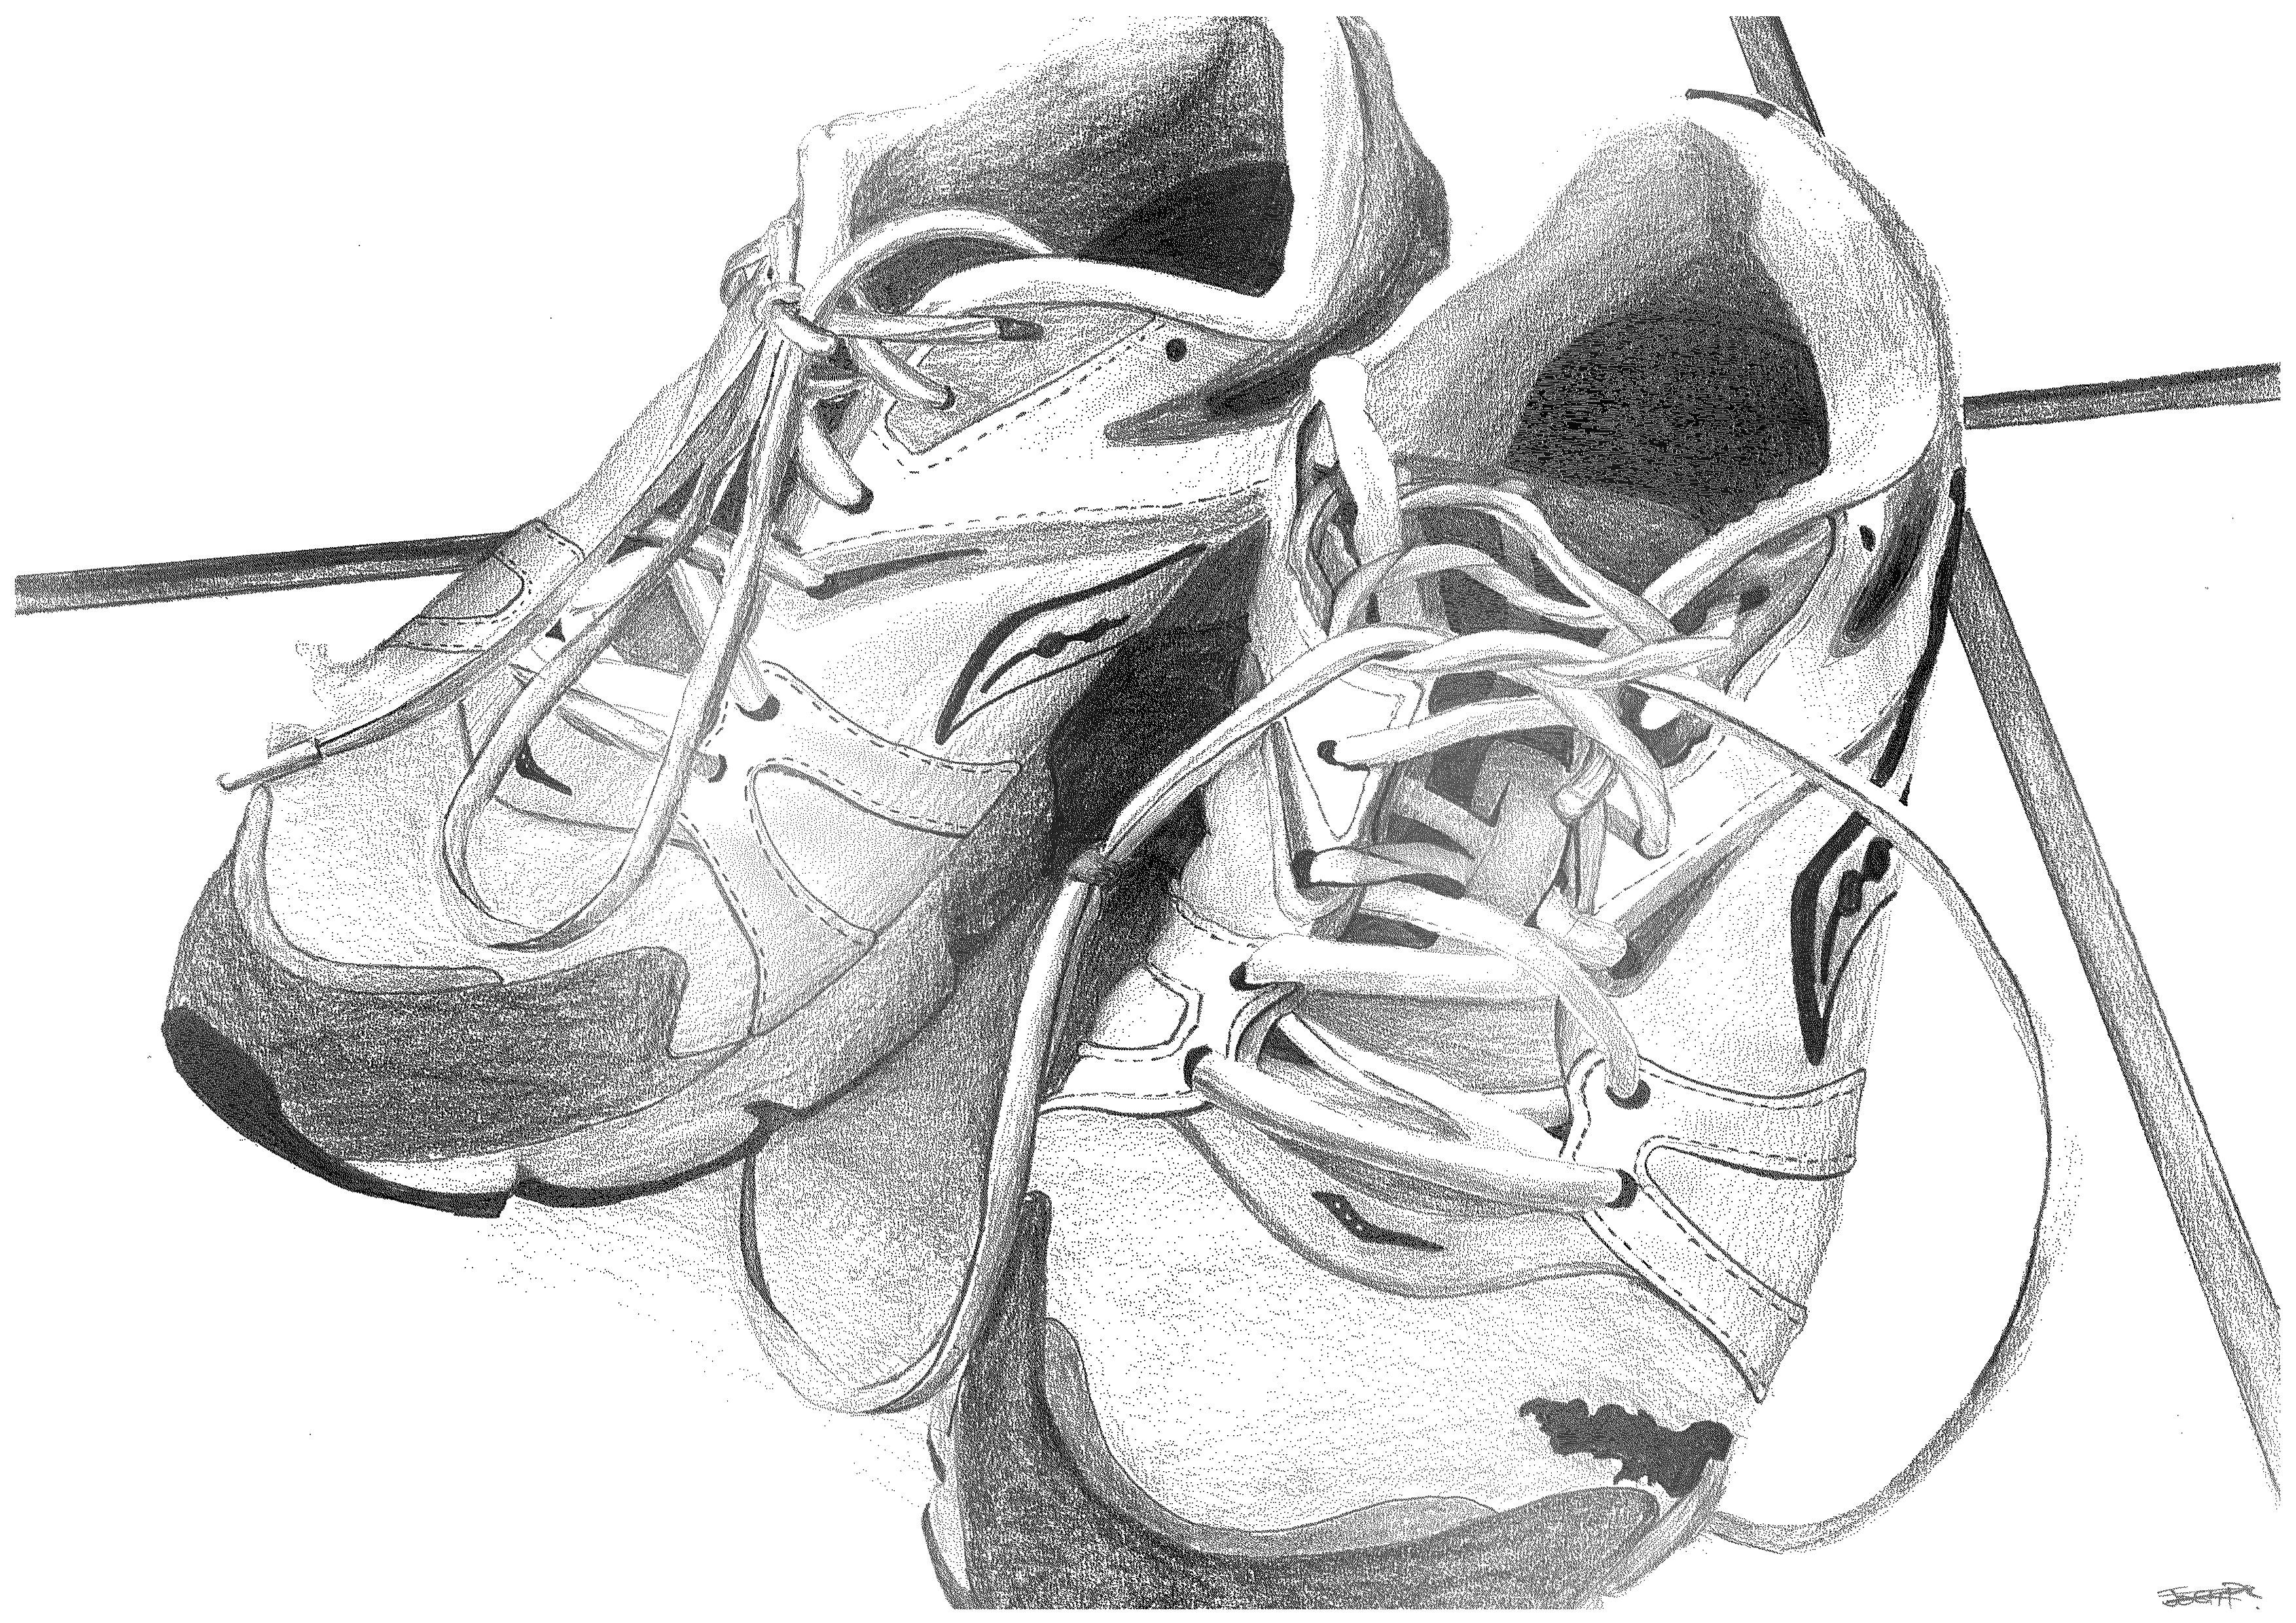 Second Drawing Worn Shoes Bct13021b Joshua Pak You can edit any of drawings via our online image editor before downloading. second drawing worn shoes bct13021b